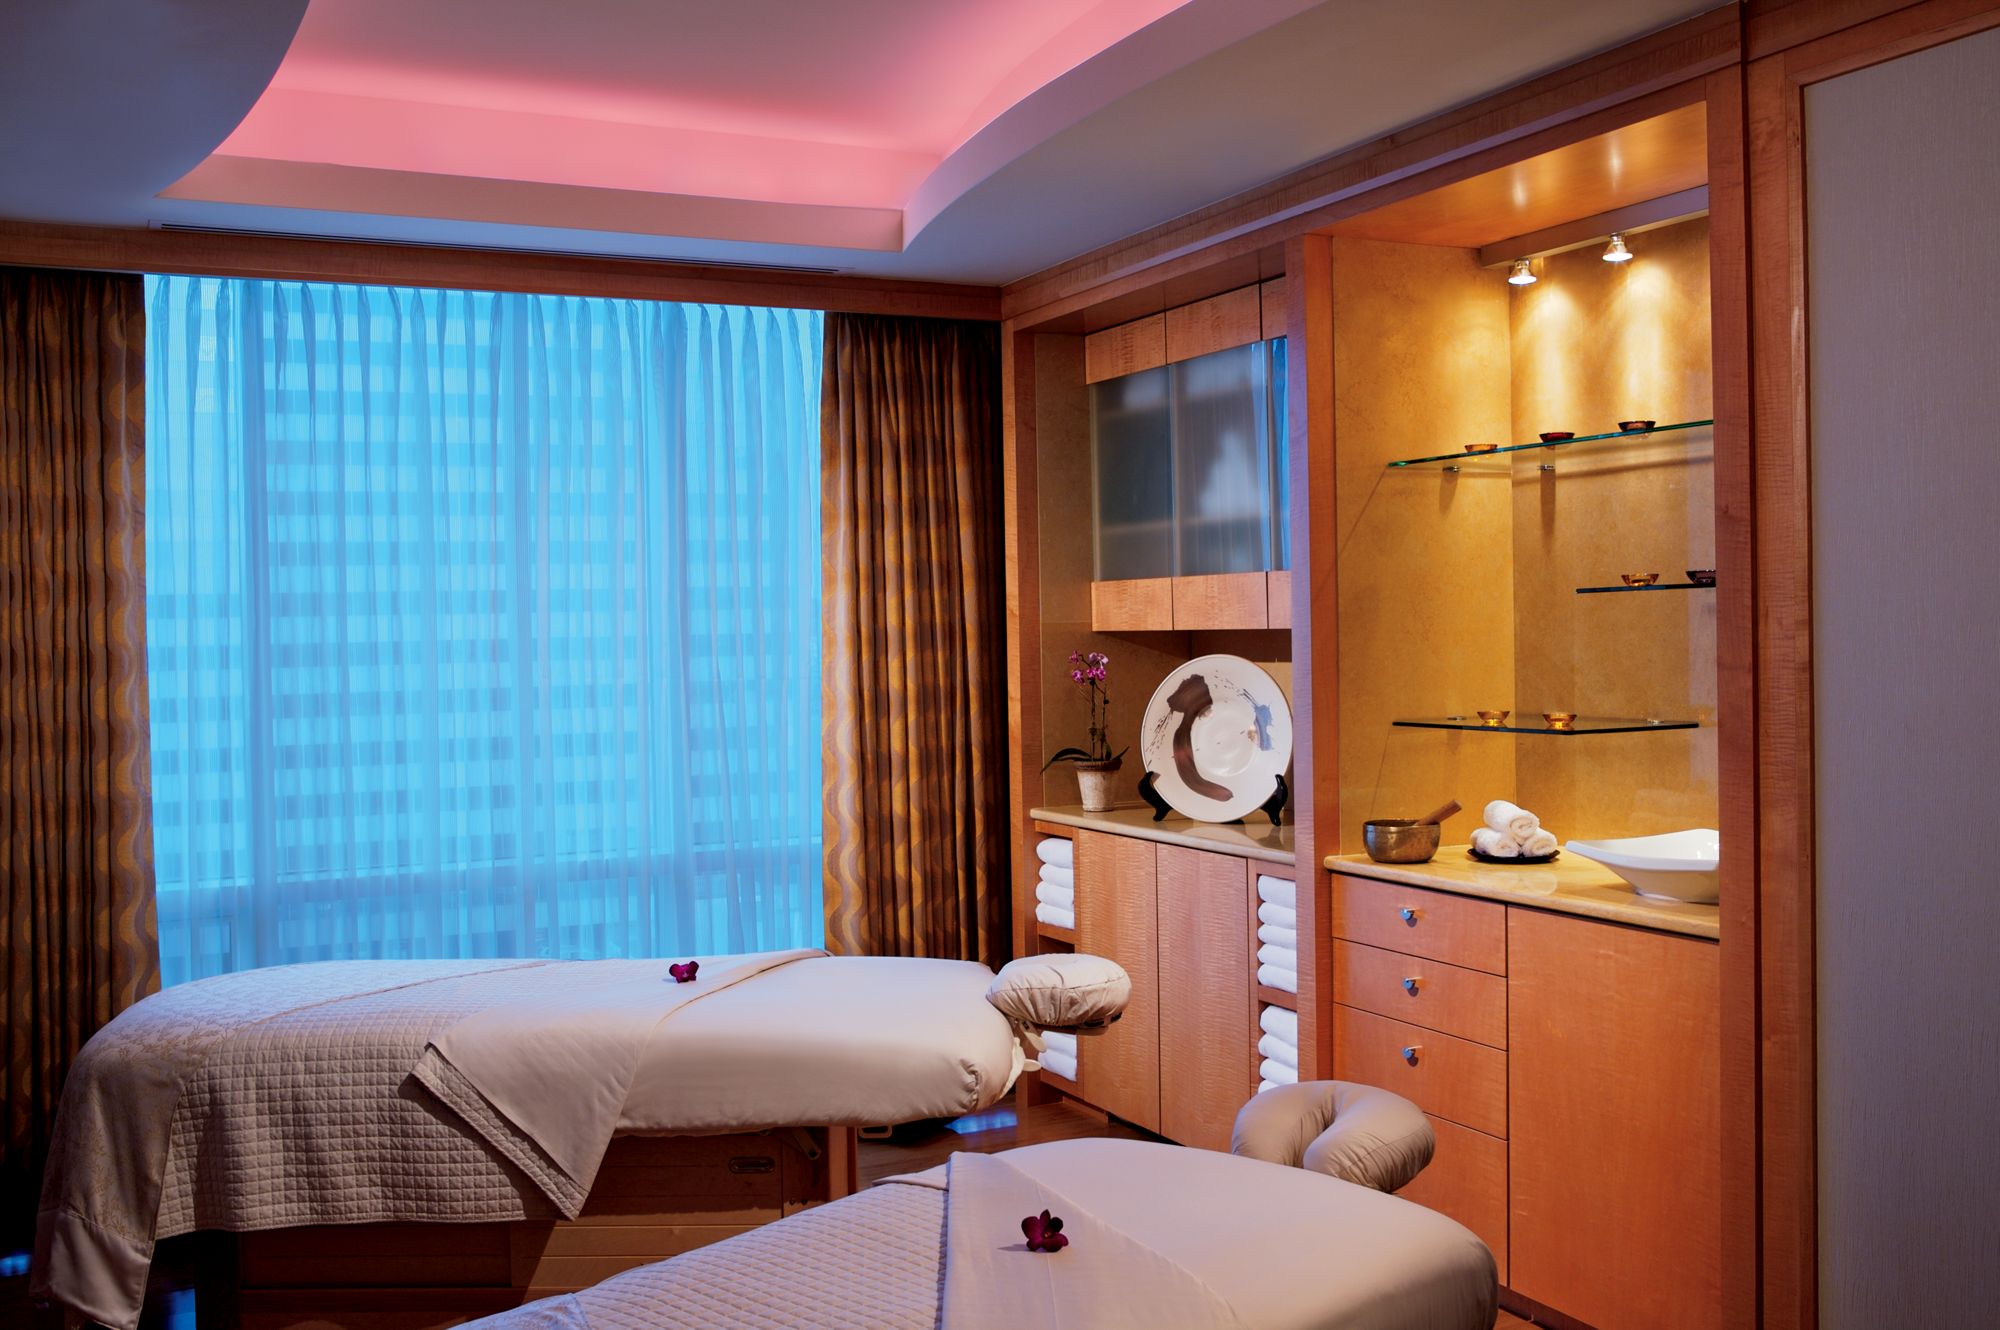 SERENITY CALLS FROM OUR LUXURIOUS DAY SPA